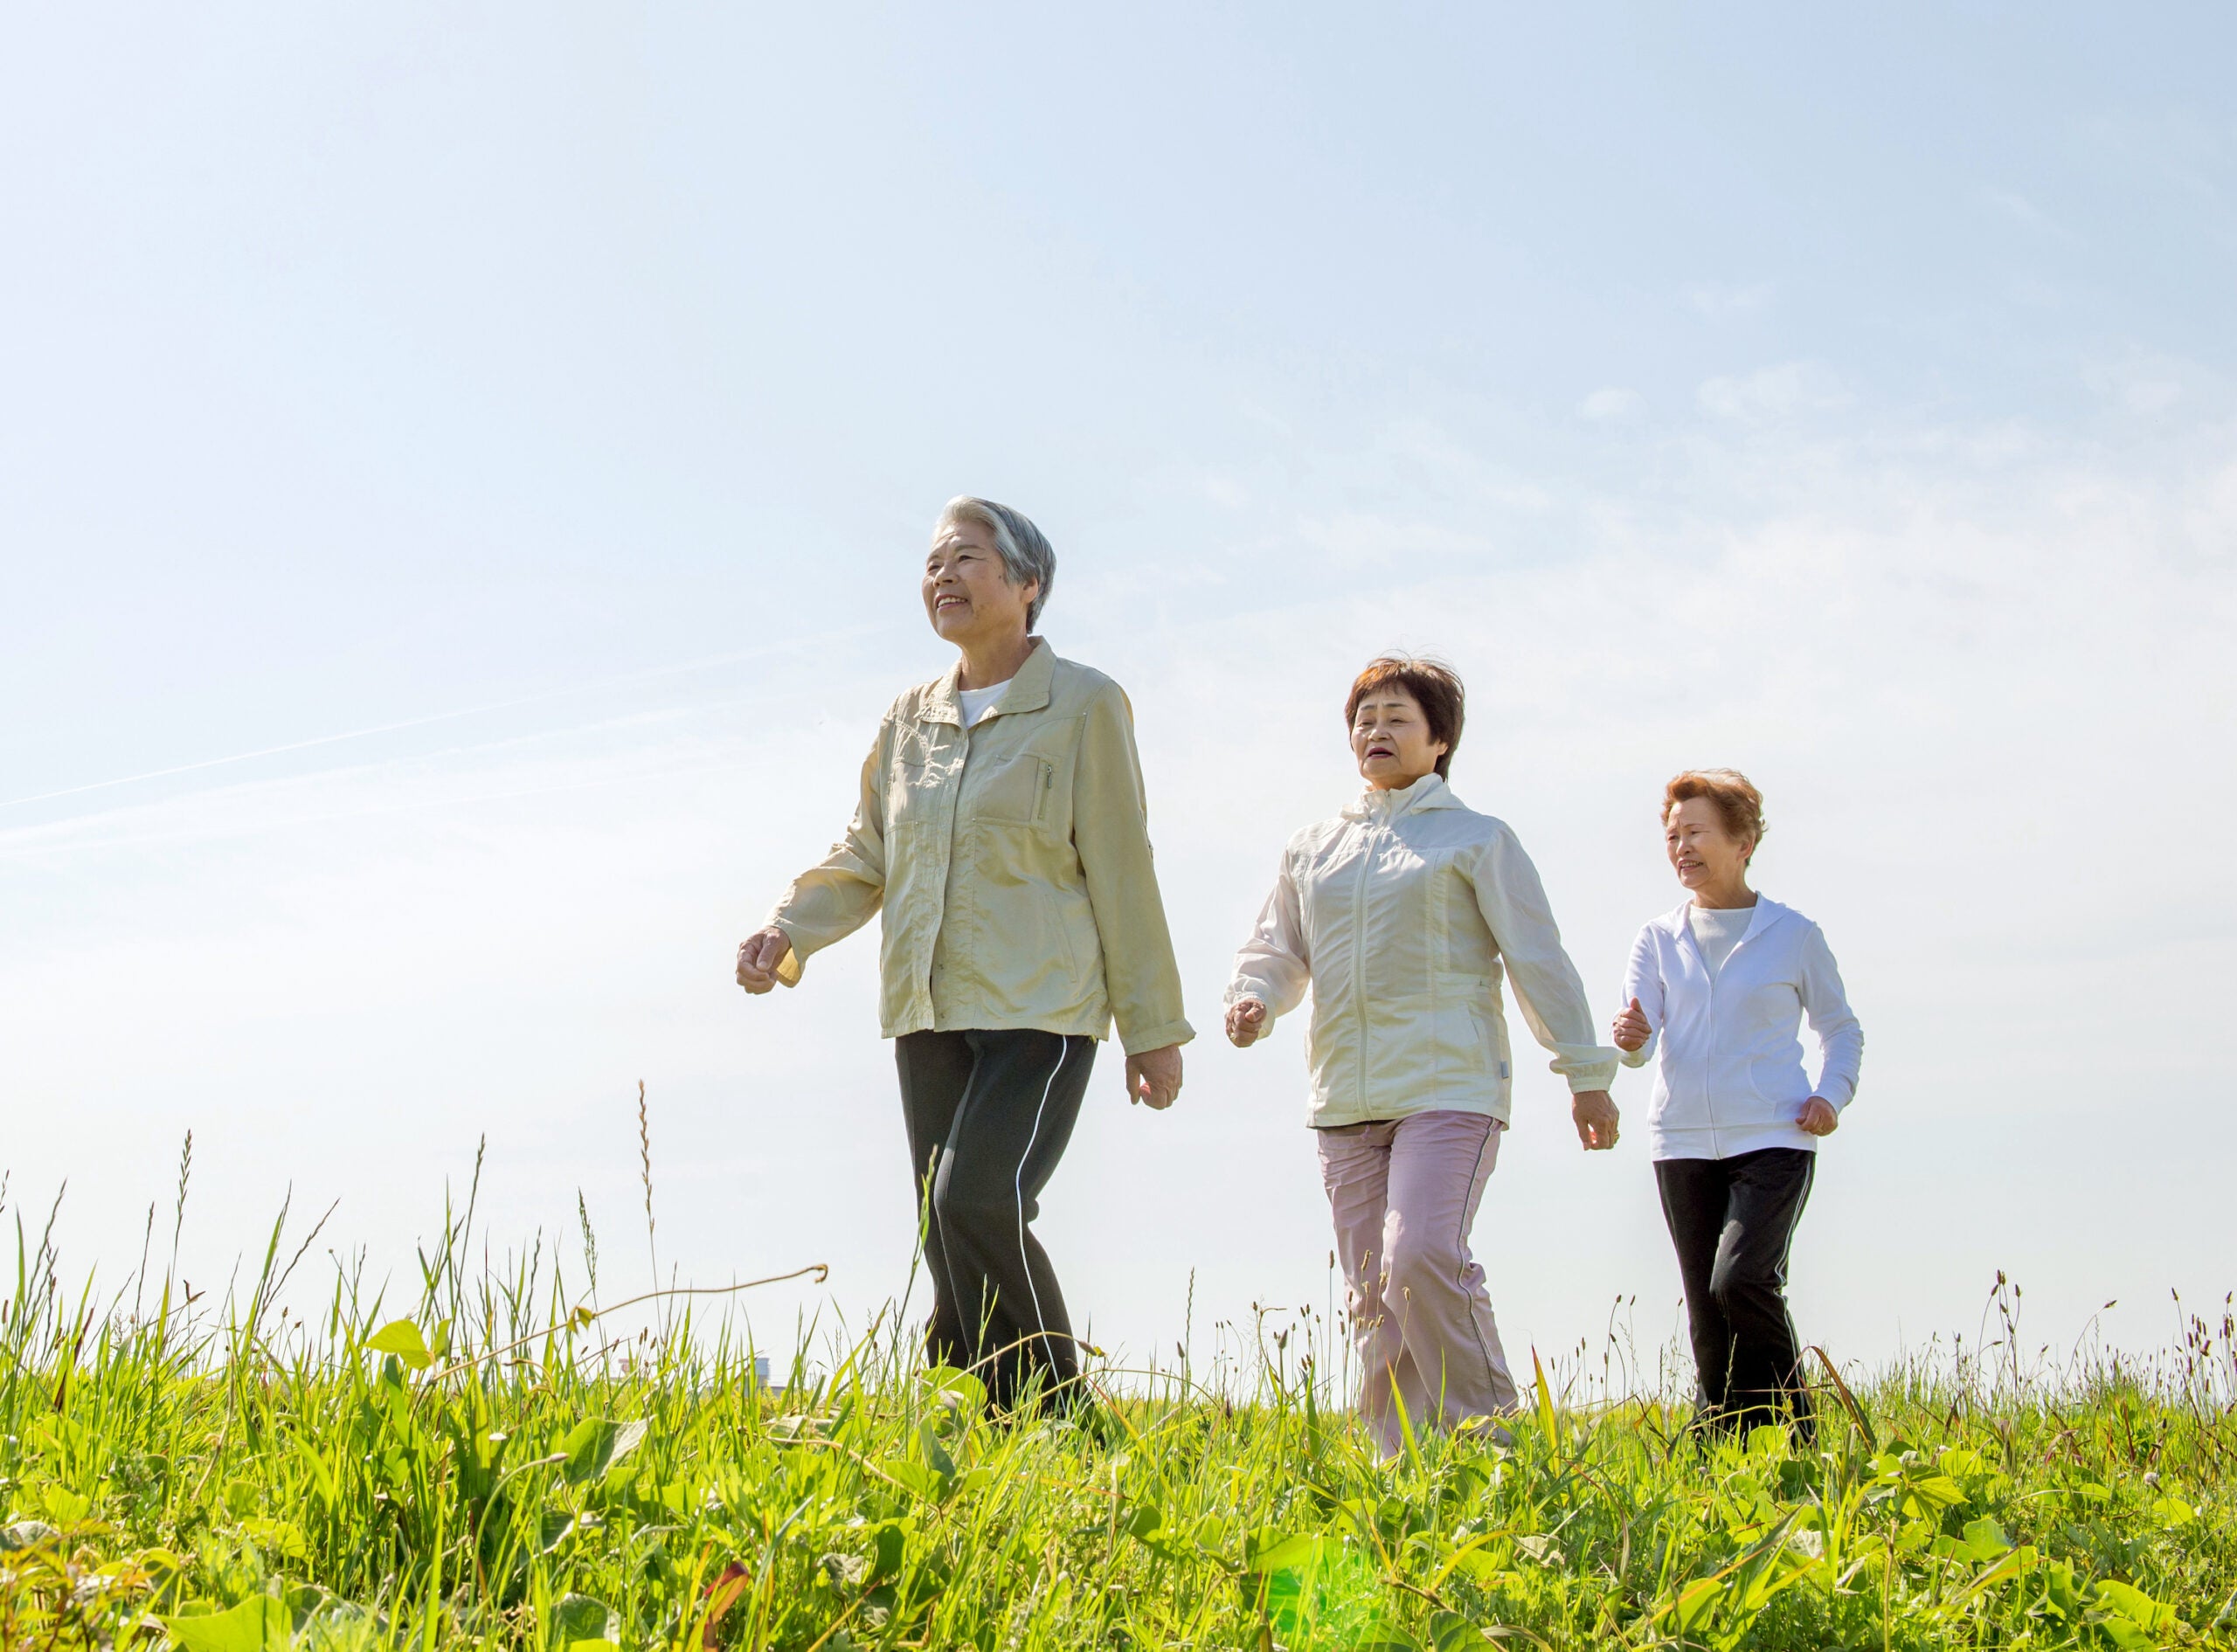 three women, older in age, walking up a grassy hill with blue sky behind them